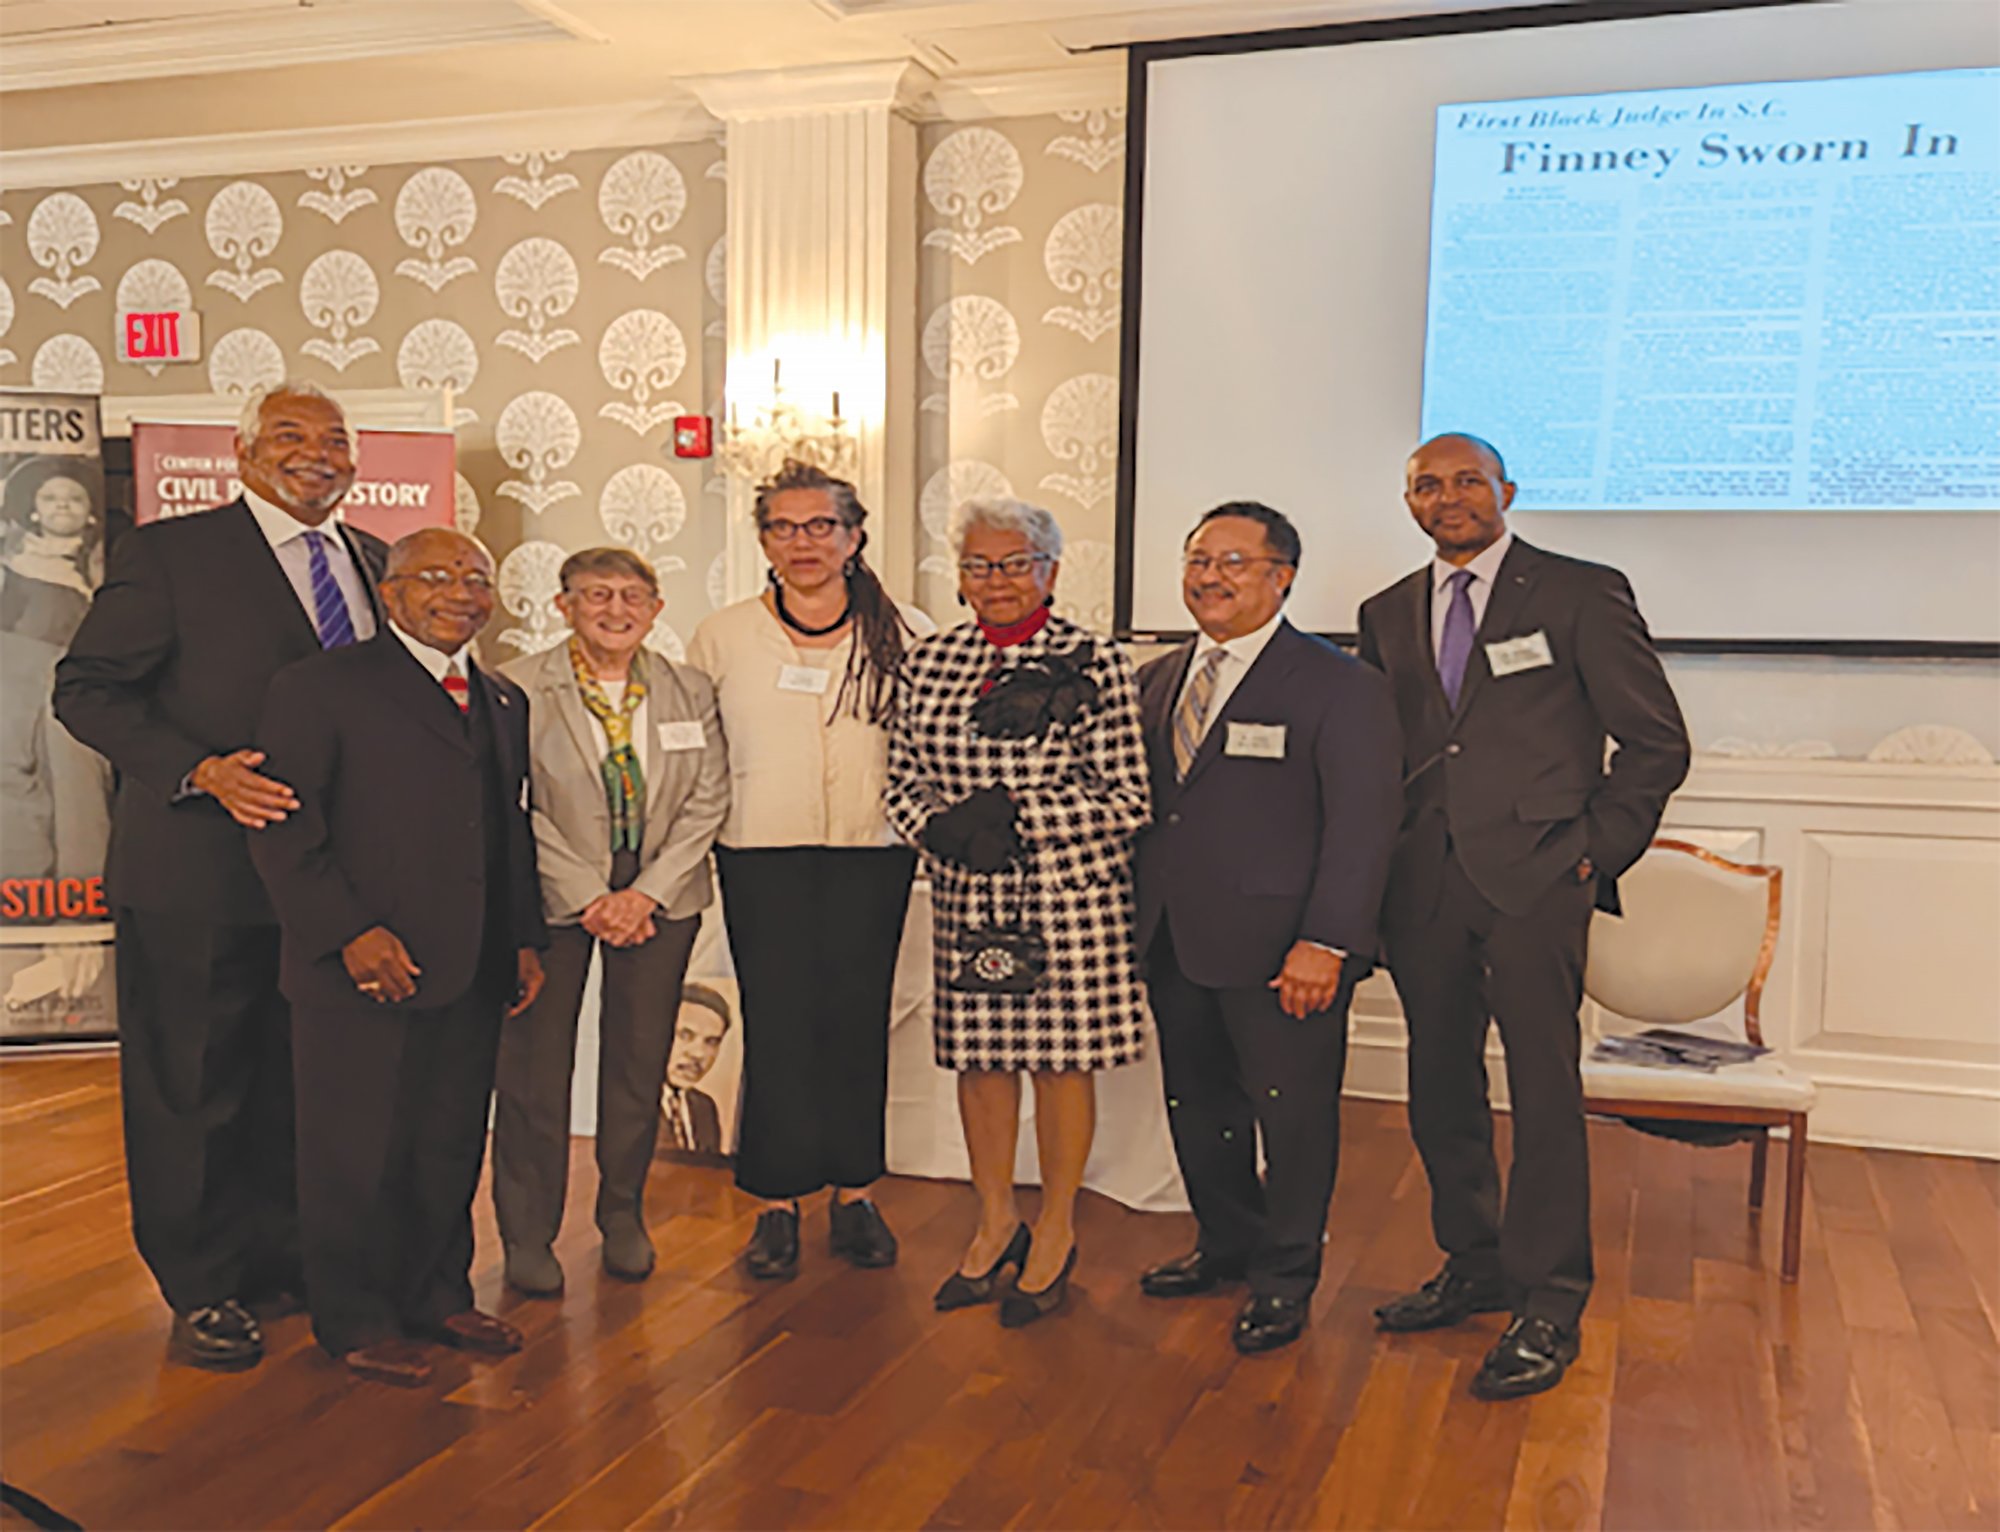 From left are Solicitor Ernest A Finney III; the Rev. Dr. J. Elbert Williams; retired Supreme Court Justice The Honorable Jean H. Toal; Professor Lynn Carol Nikky Finney; Mrs. Frances Davenport Finney; Luther Battiste III, Esquire; and Dr. Bobby Donaldson, USC history professor.